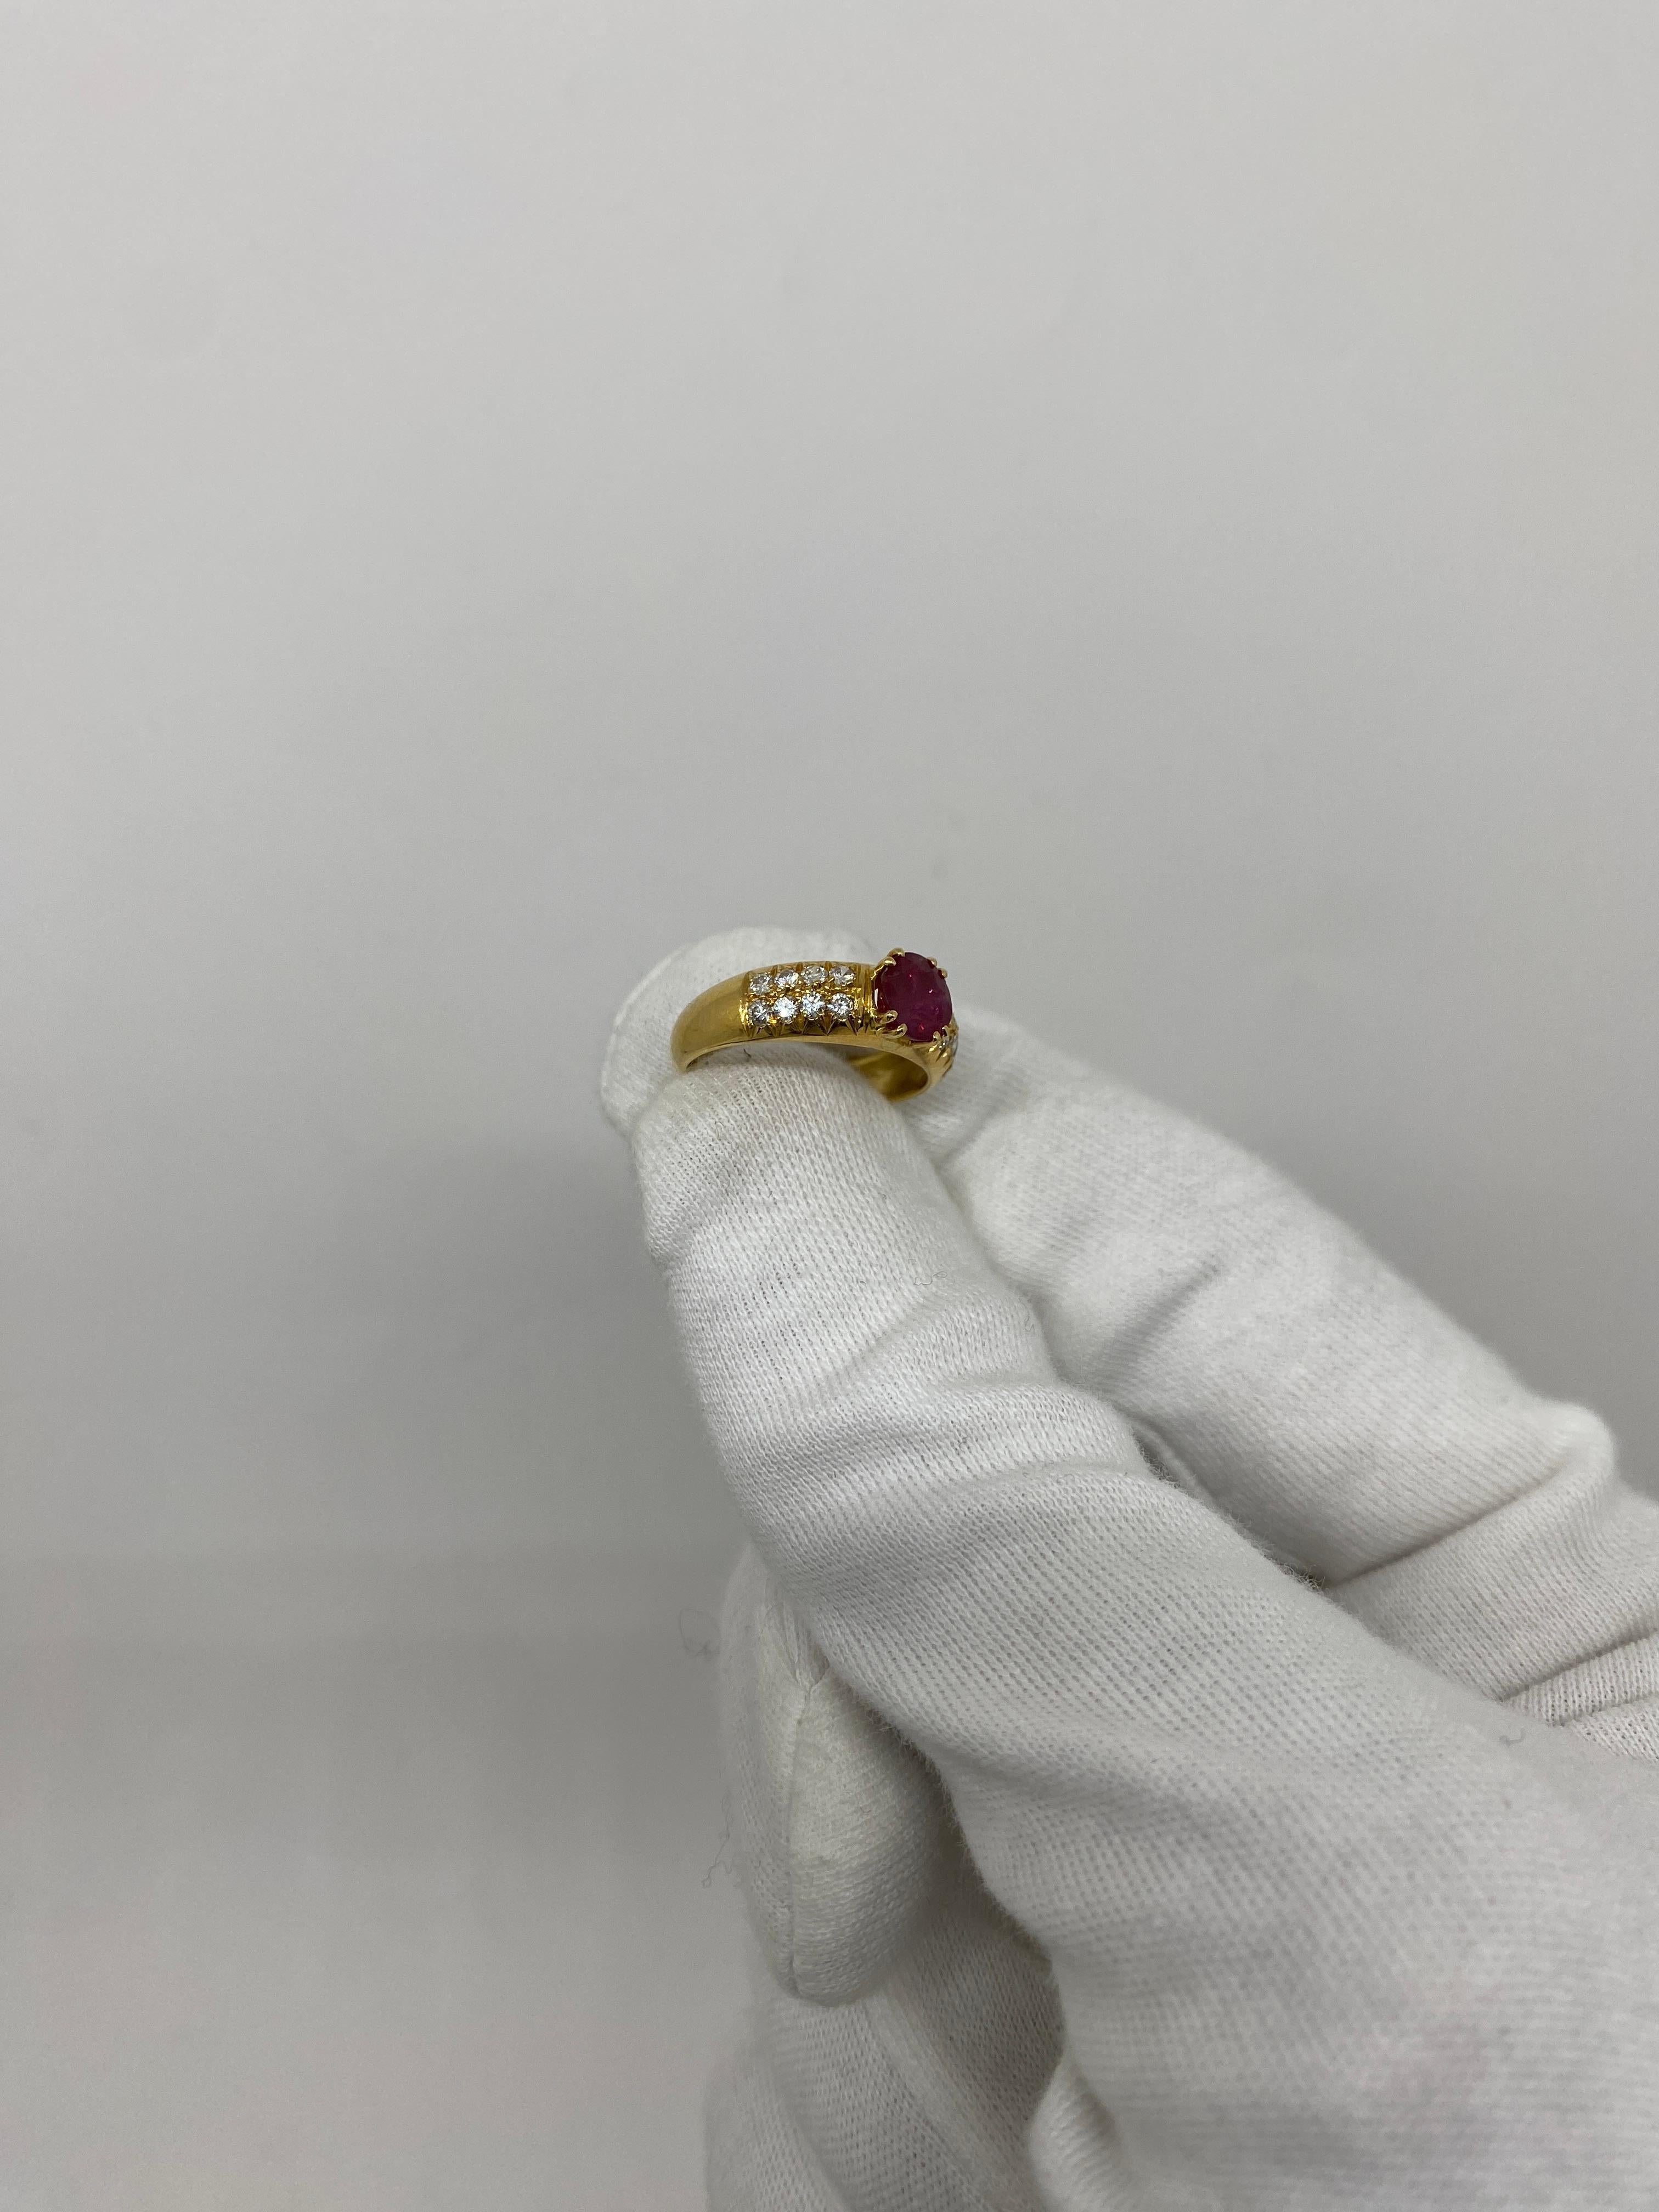 Ring made of 18kt yellow gold with round-cut red ruby and paved with white brilliant-cut diamonds

Welcome to our jewelry collection, where every piece tells a story of timeless elegance and unparalleled craftsmanship. As a family-run business in